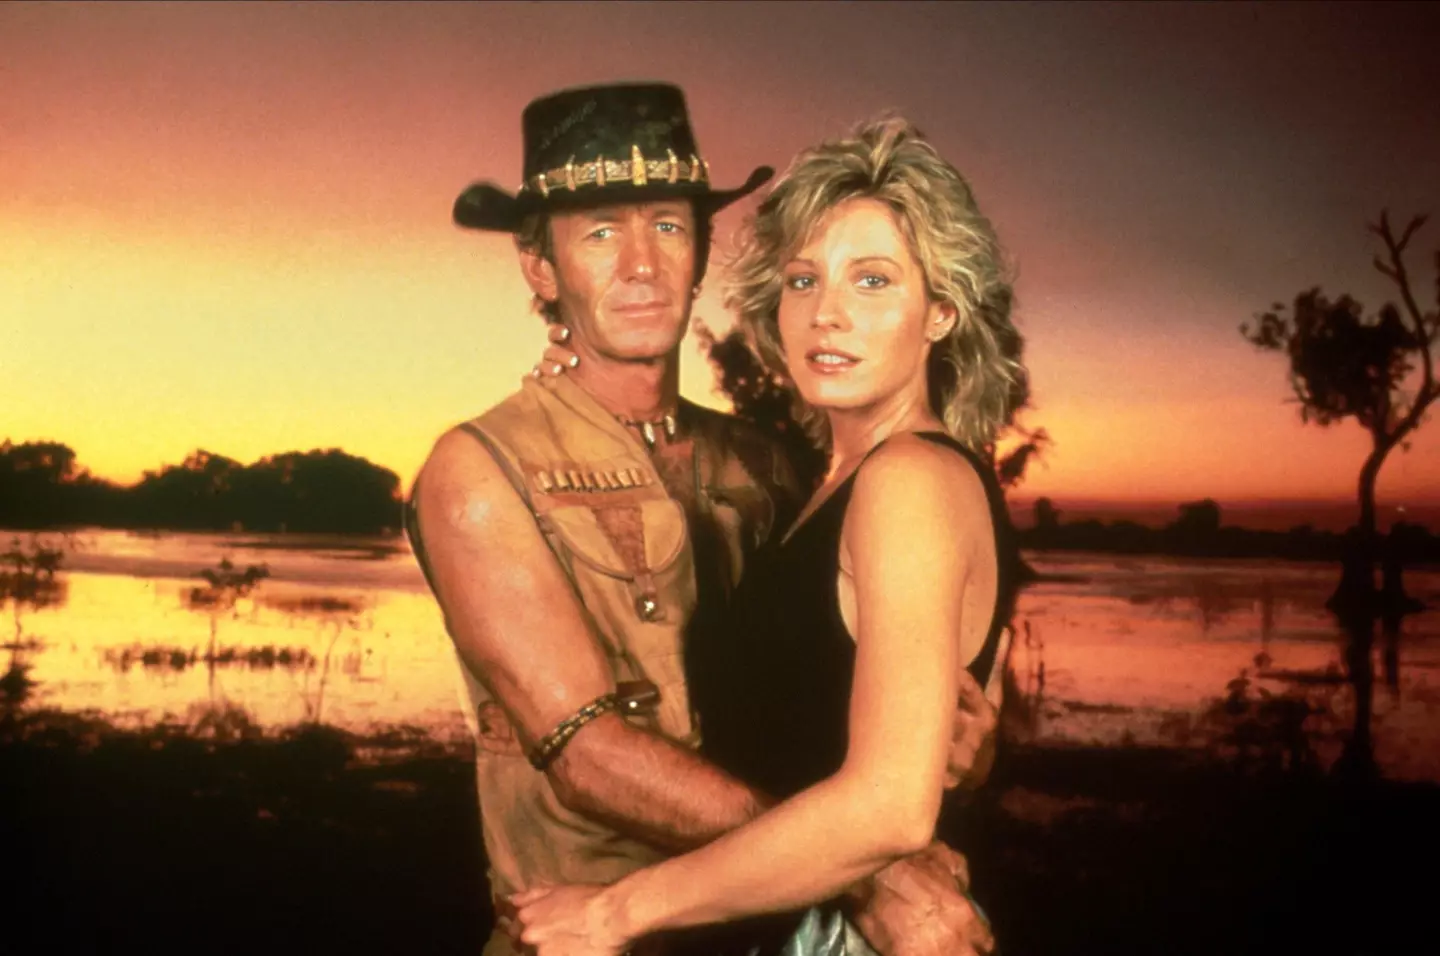 Paul Hogan and his now ex-wife Linda Kozlowski in Crocodile Dundee. They share a son, Chance.